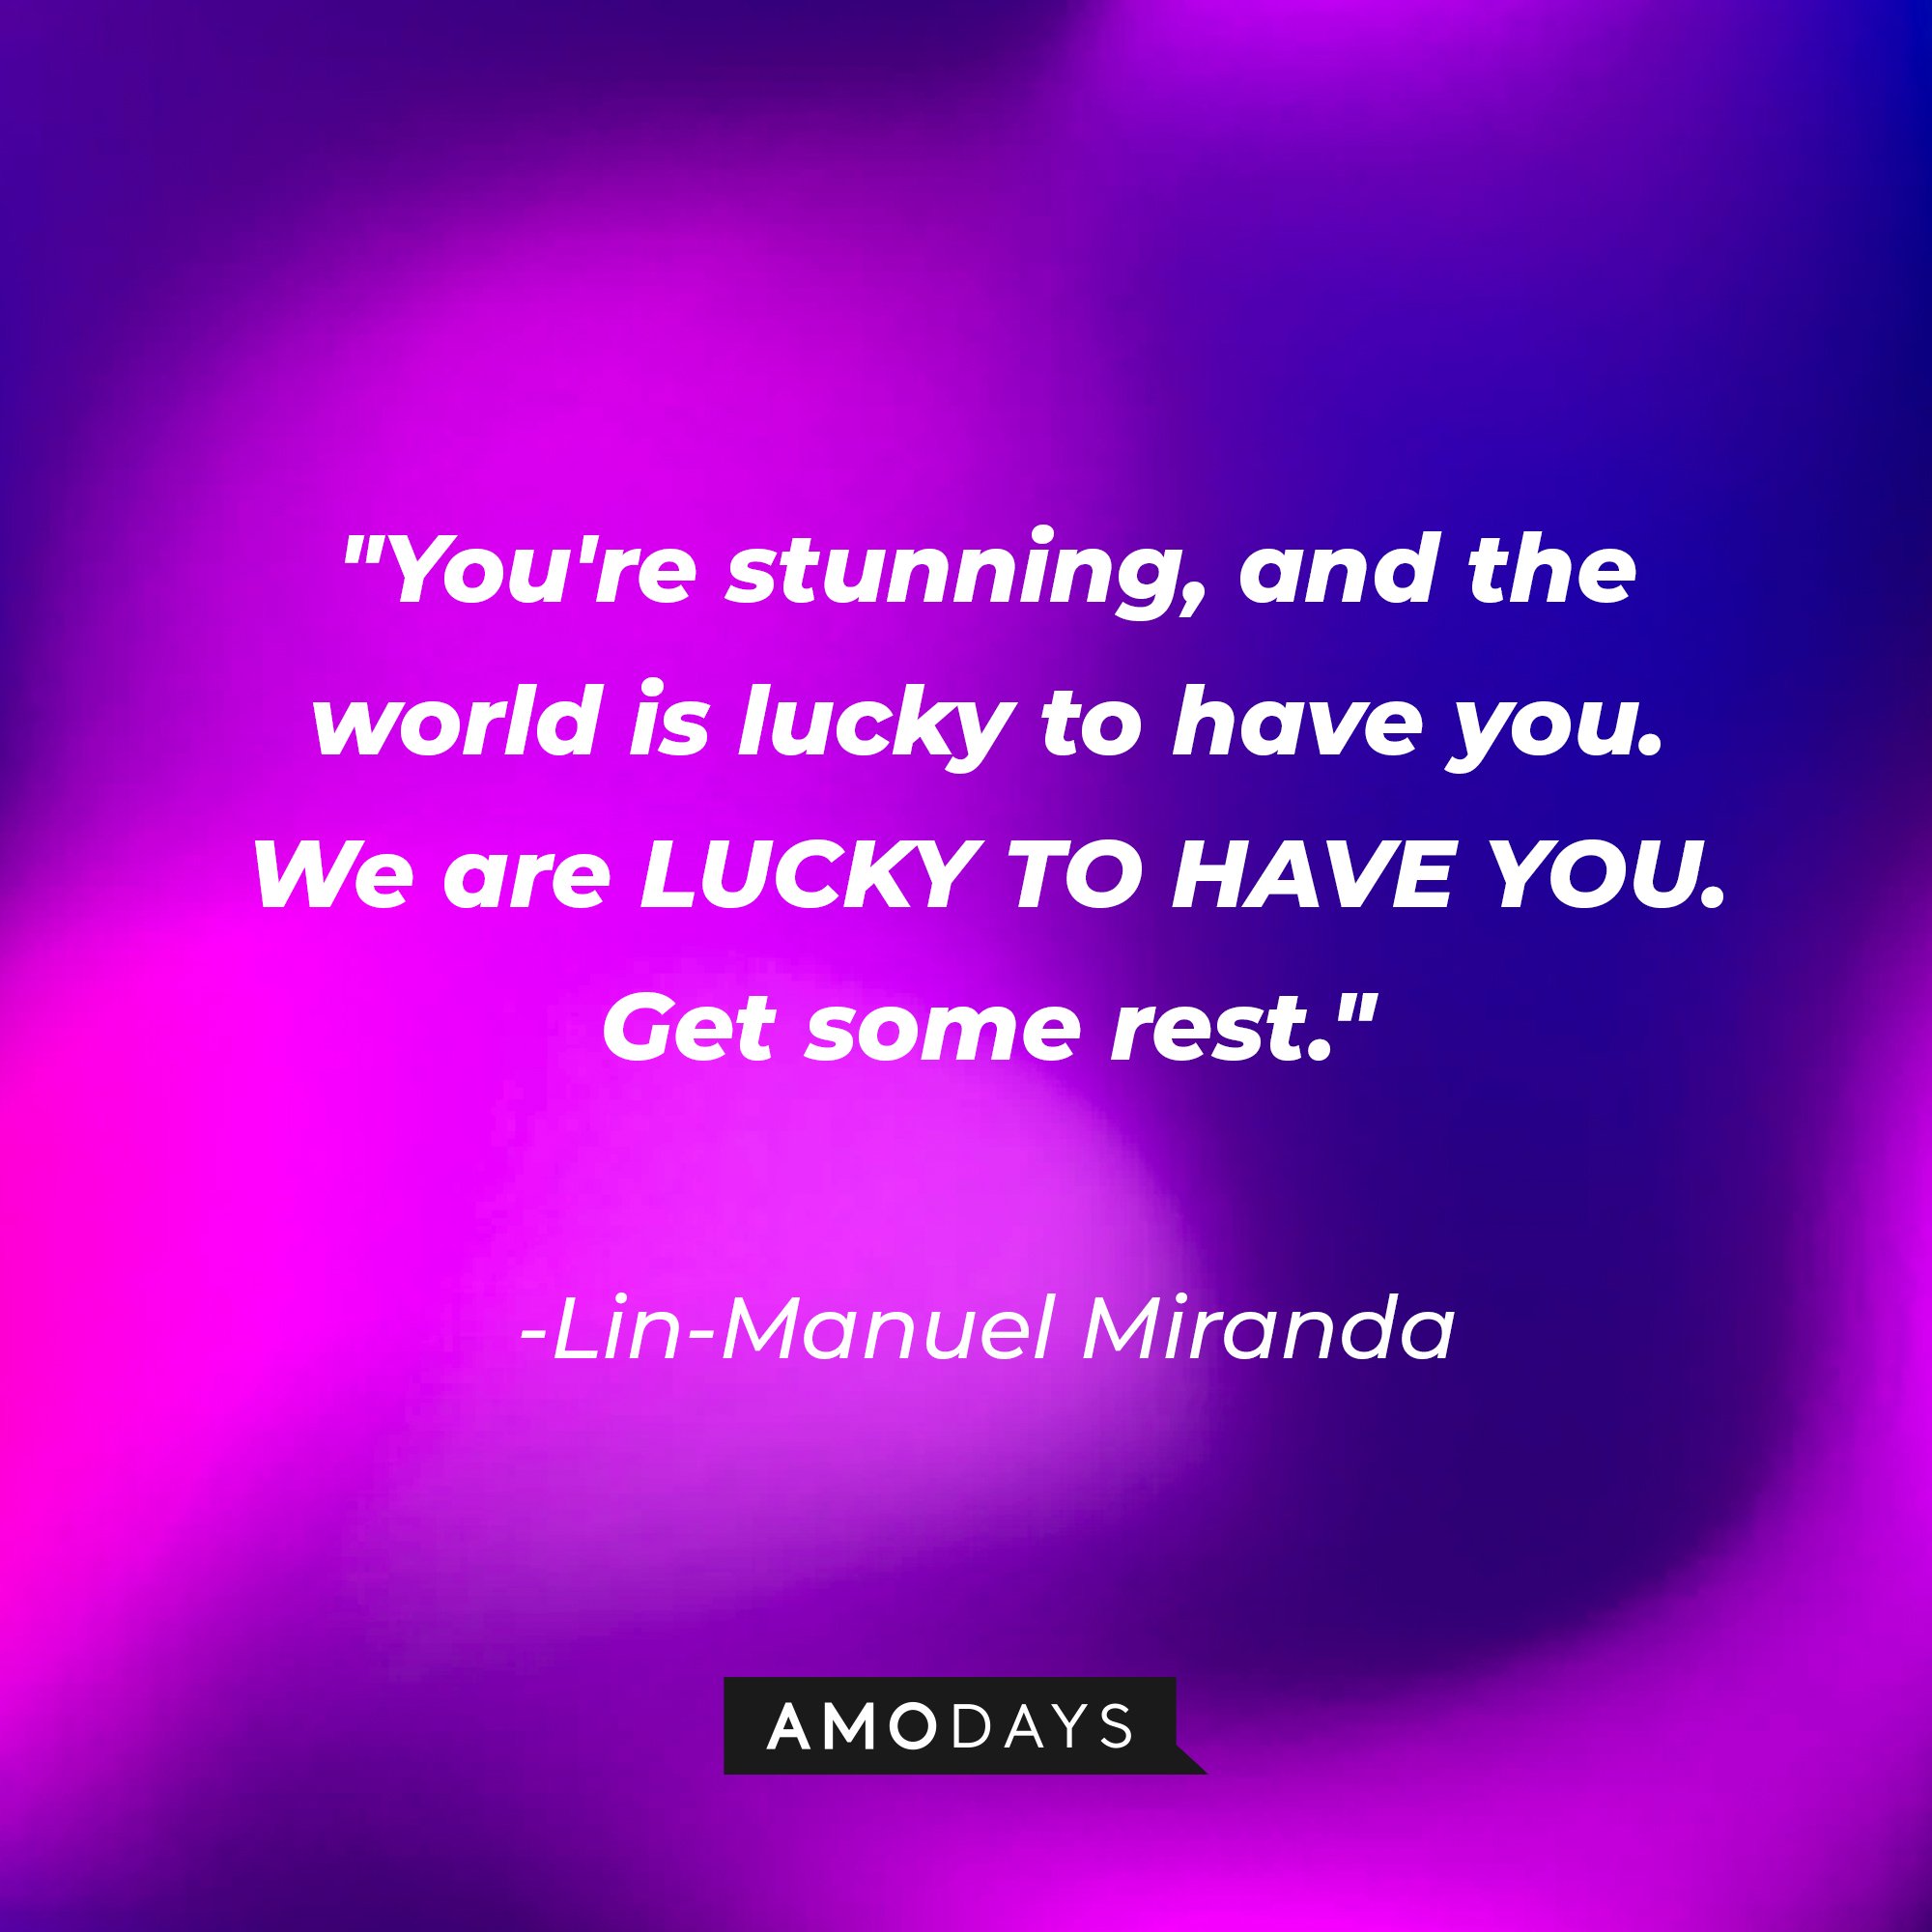 Lin-Manuel Miranda's quote: "You're stunning and the world is lucky to have you. / We are LUCKY TO HAVE YOU. / Get some rest." | Image: AmoDays